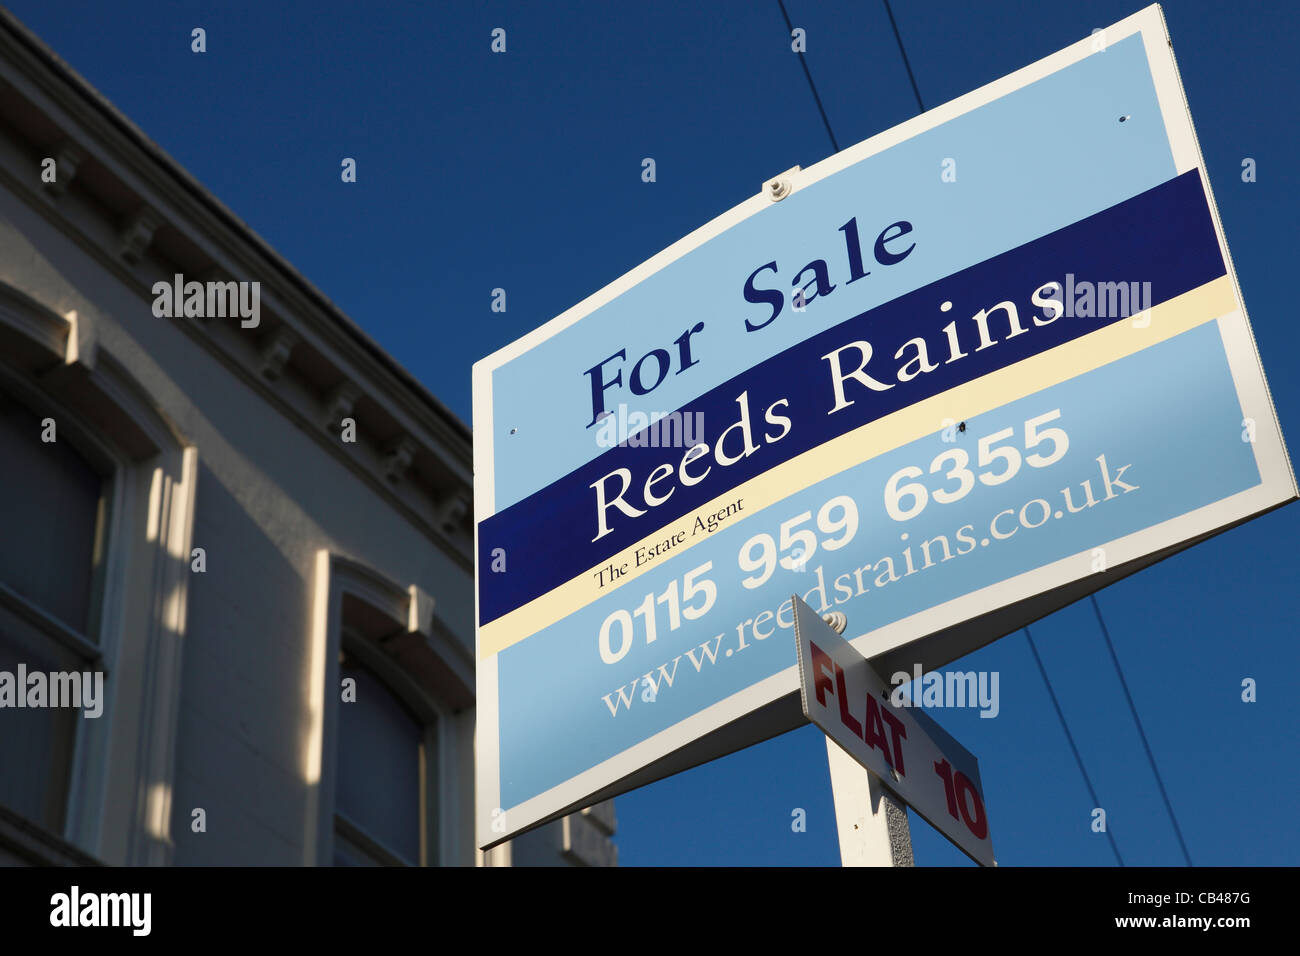 A Reeds Rains estate agents sign outside property for sale in the U.K. Stock Photo